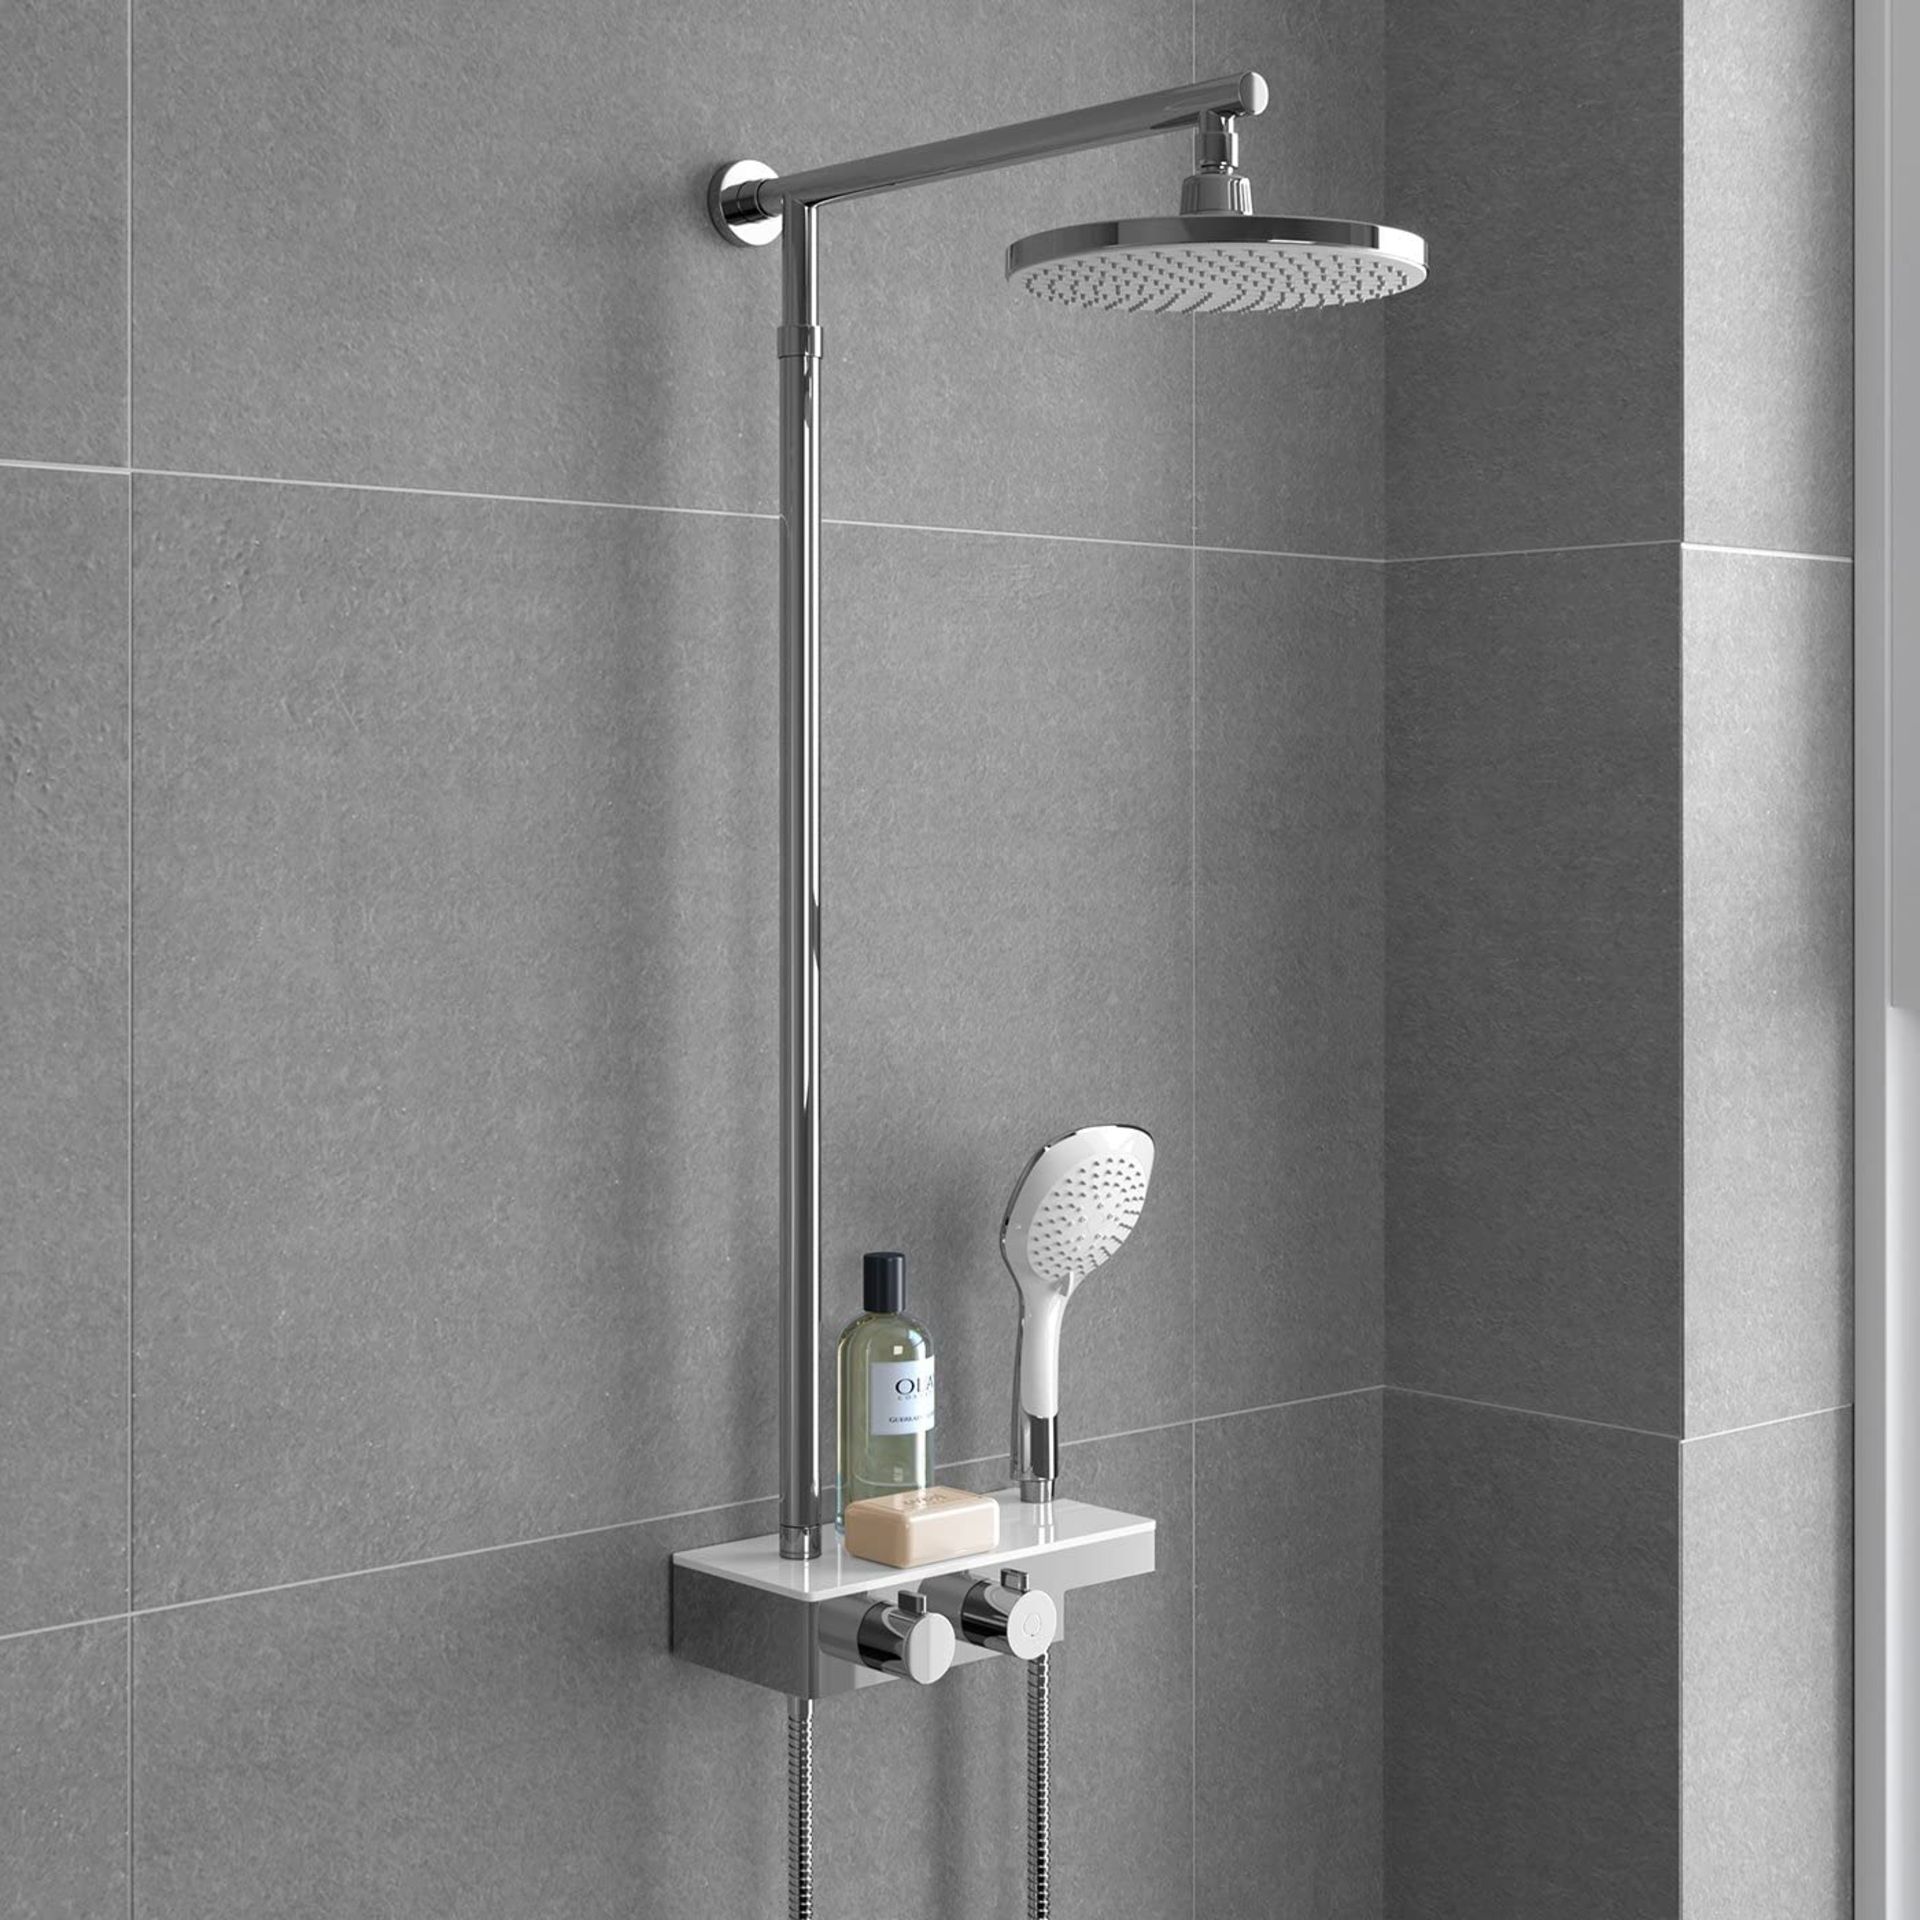 (LV44) Round Thermostatic Bar Mixer 2 way exposed Shower Set Valve with Shelf 220mm Head + Han...